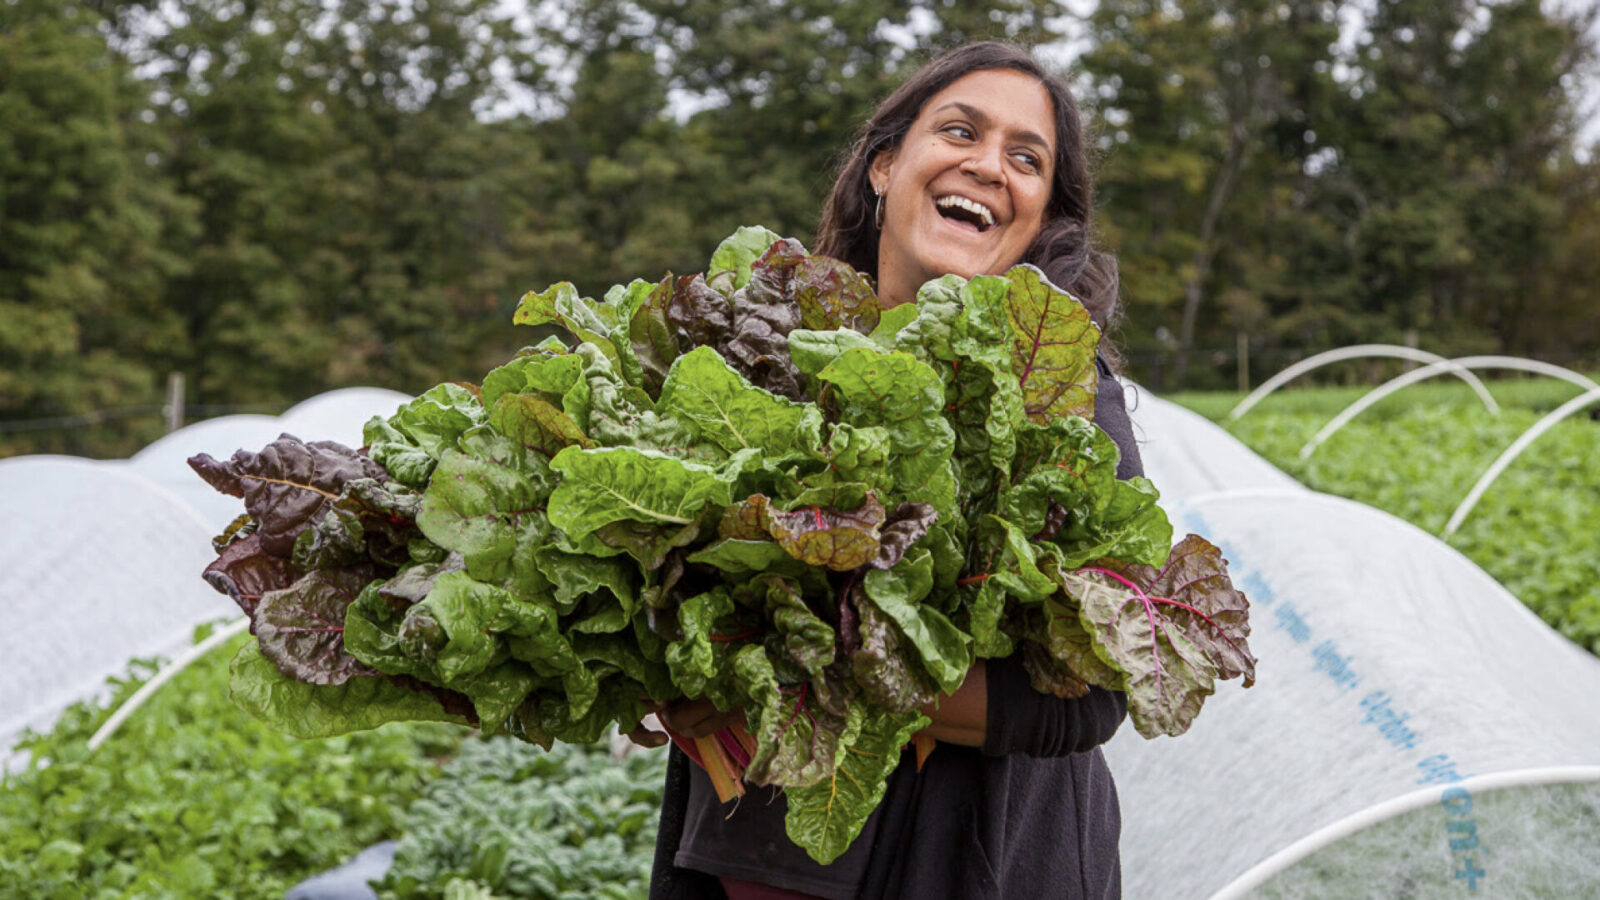 Jen Salinetti, co-founder, farmer and director of education and community engagement at Woven Roots Farm, gathers abundant greens. Press photo courtesy of WCMA.